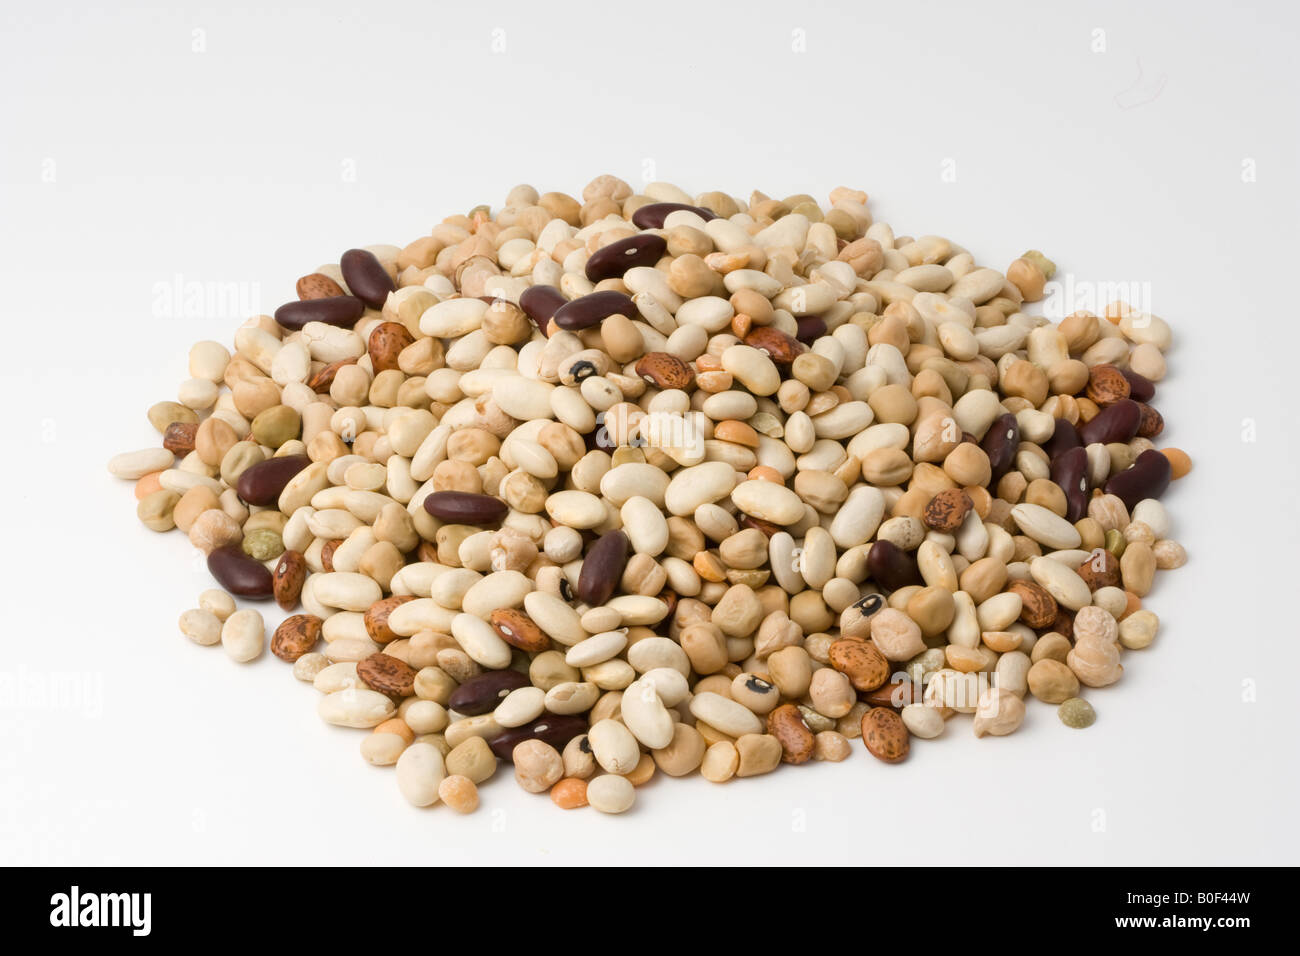 Dried beans and pulses Stock Photo